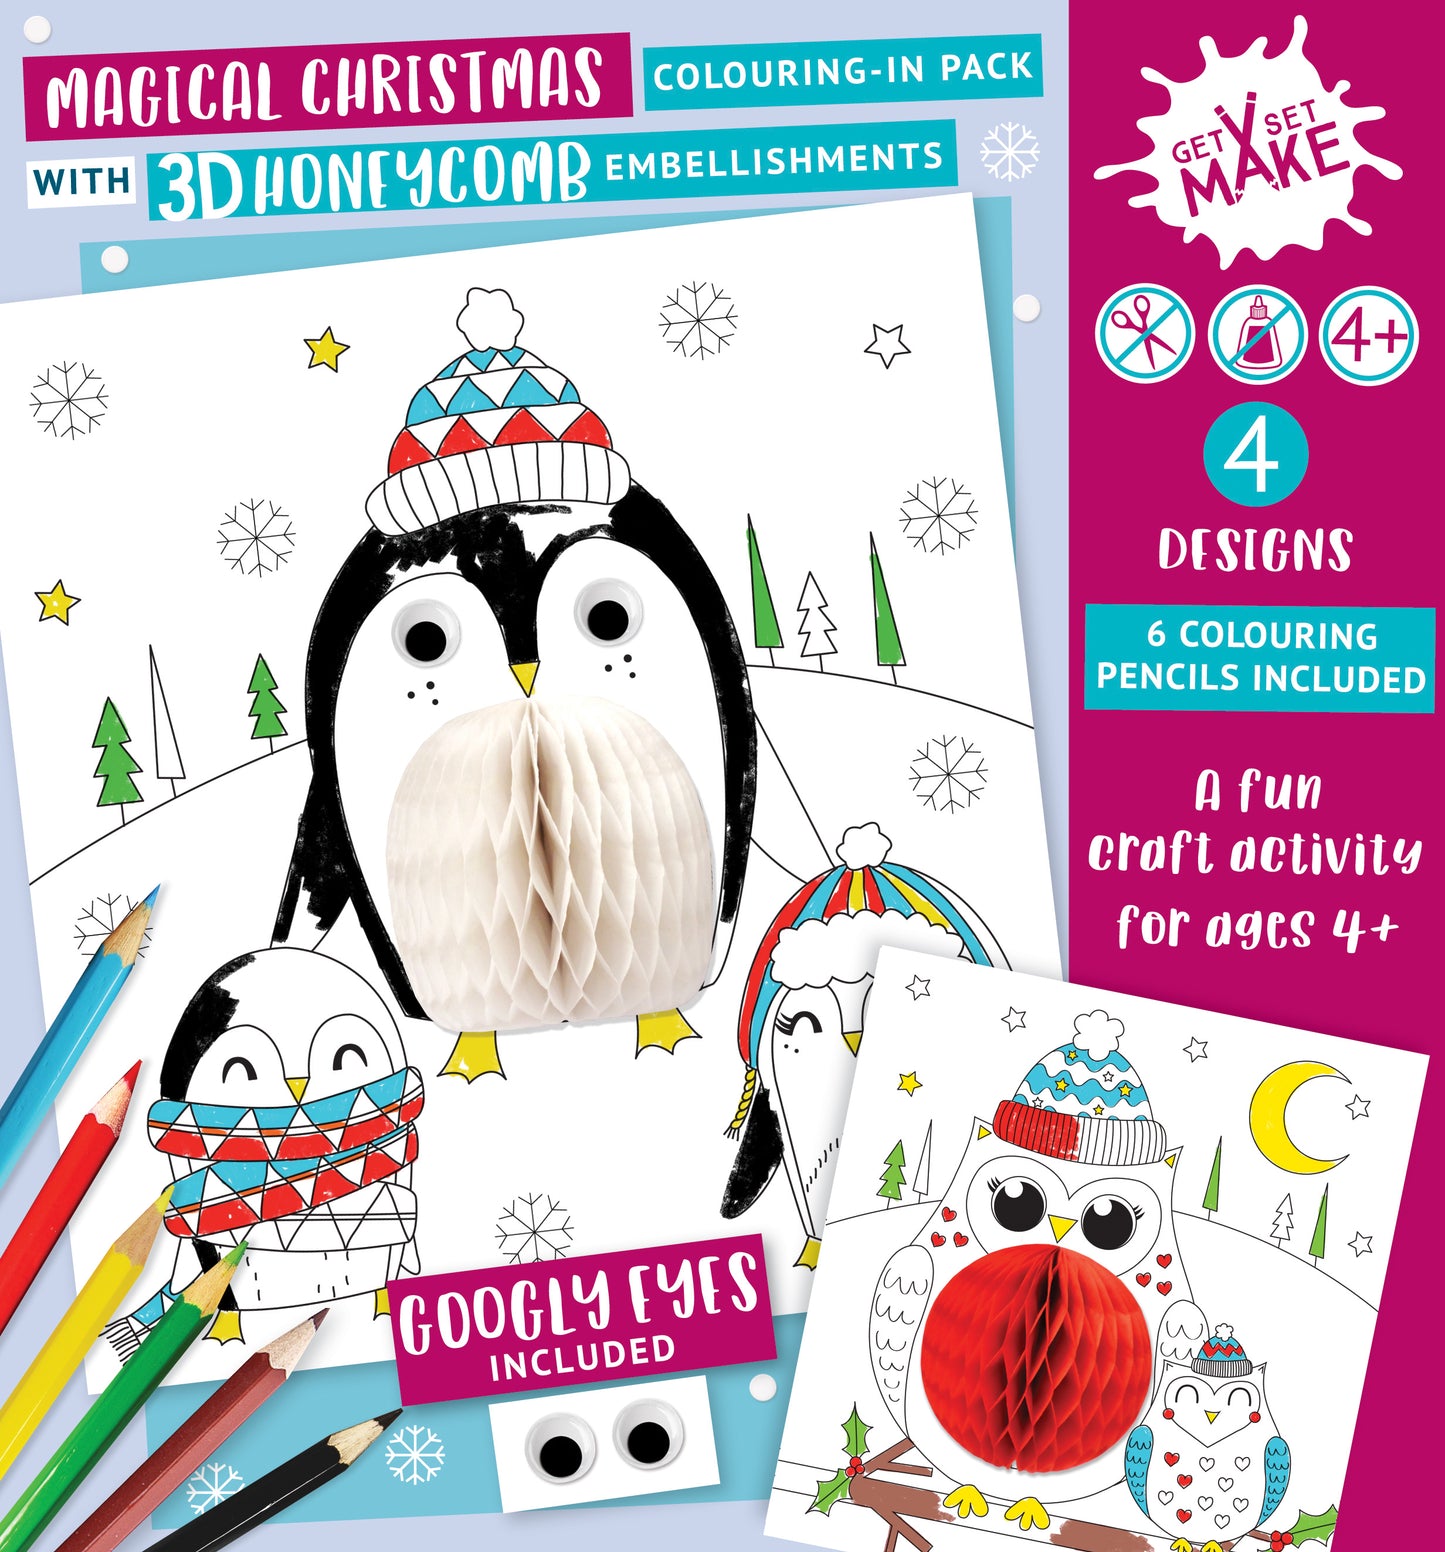 Magical Christmas Get Set Make Activity Pack Colouring In Set